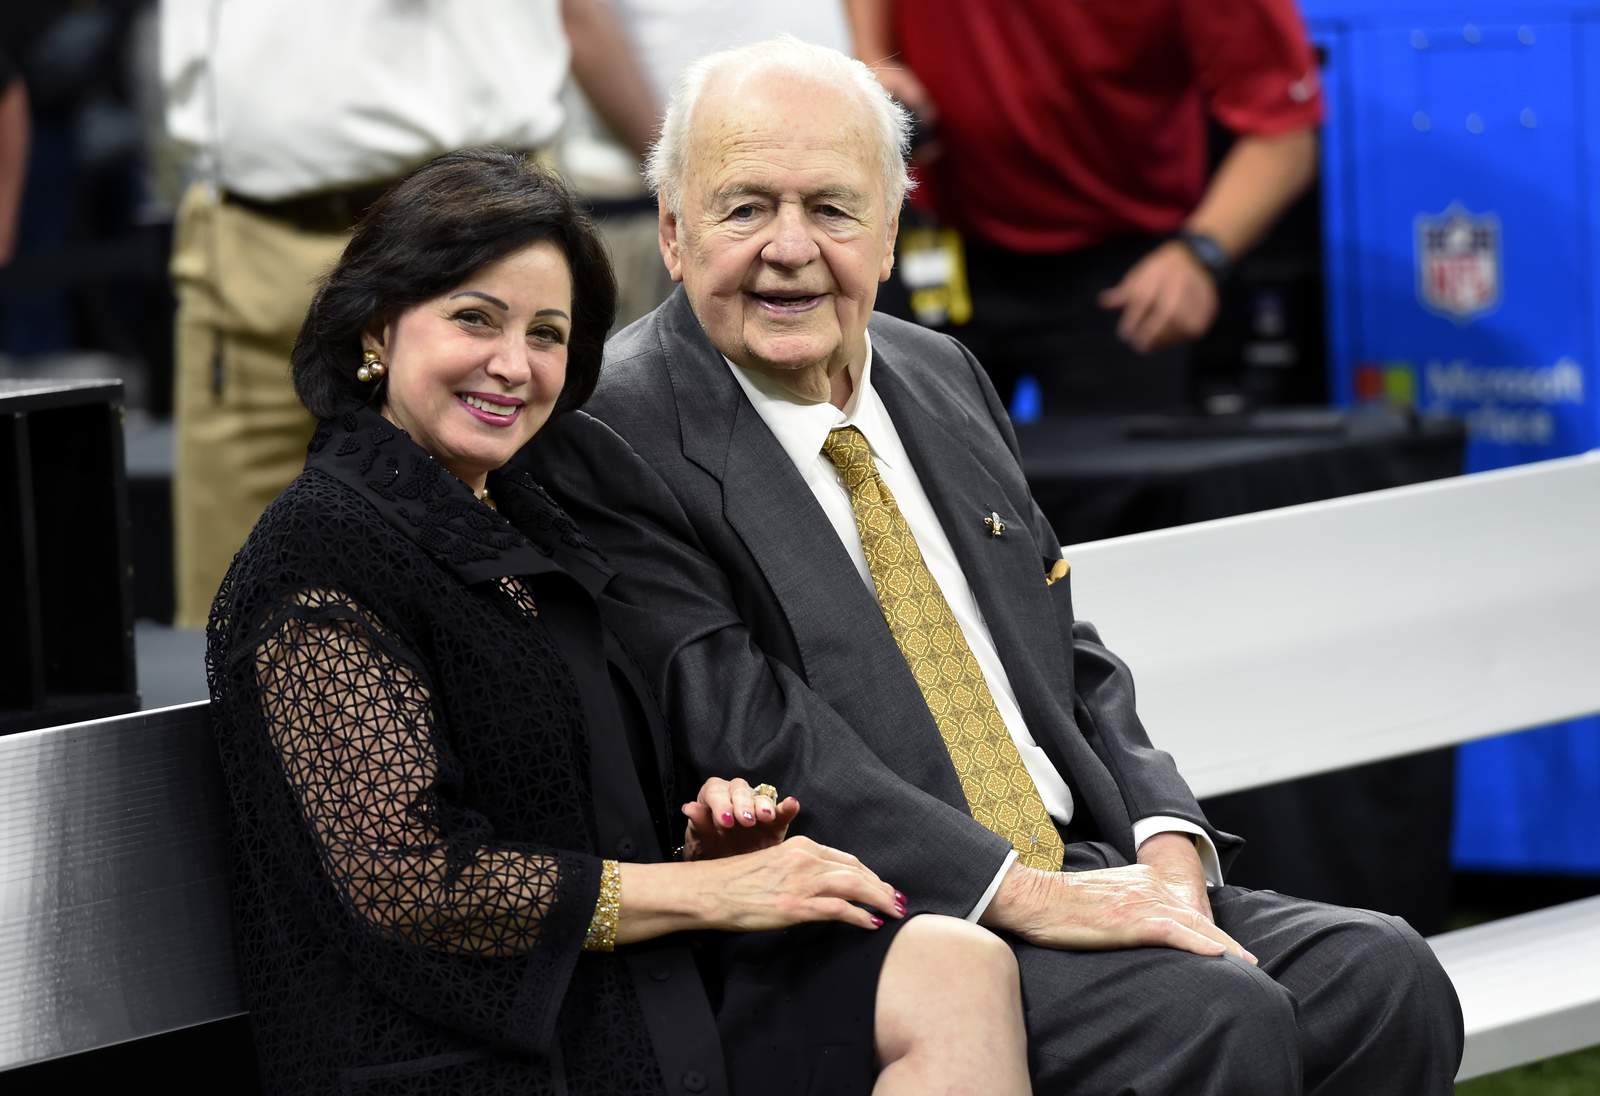 News outlets seek to unseal files on Saints owner Tom Benson